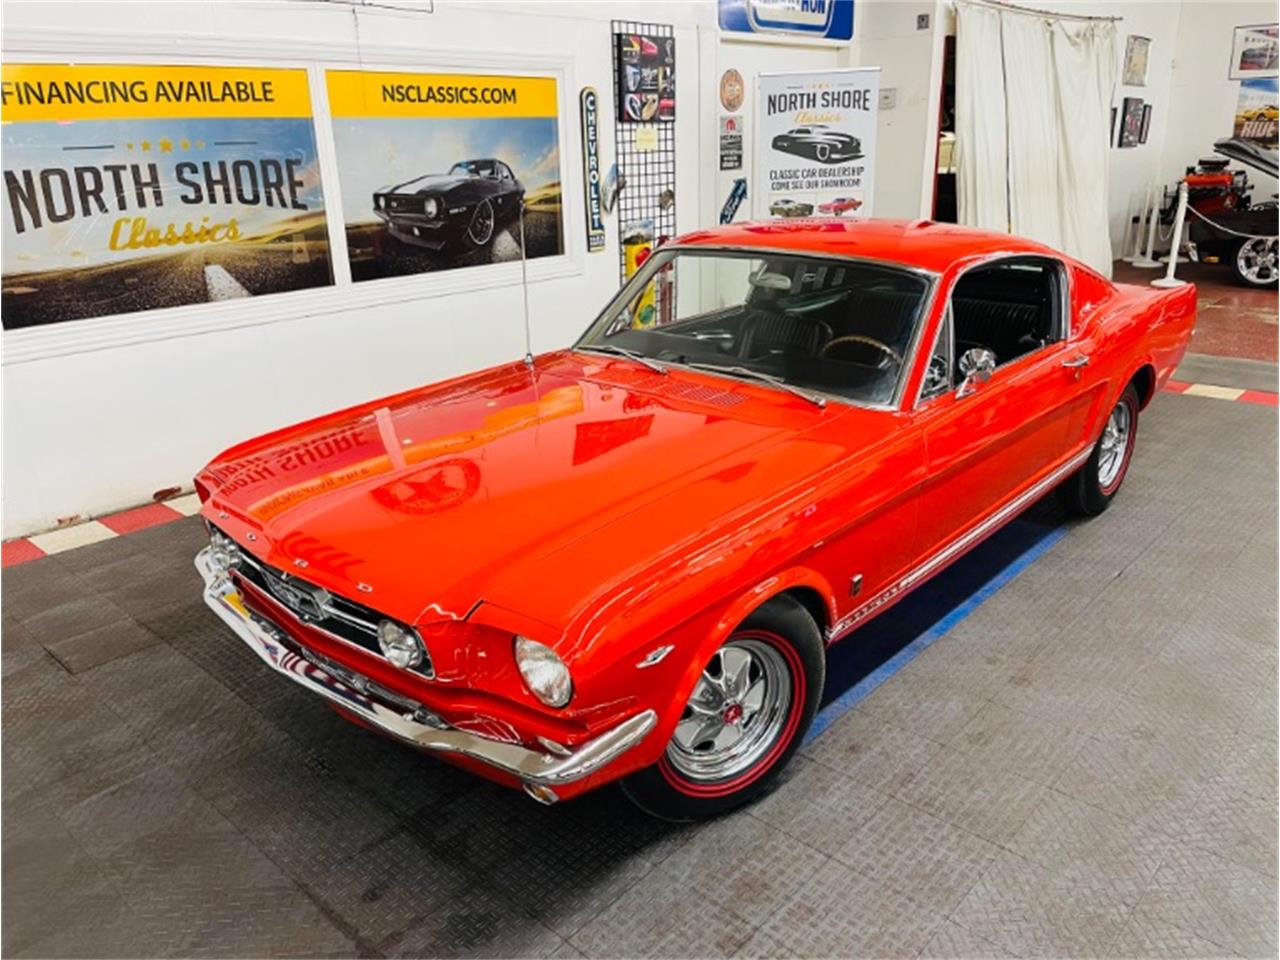 for sale 1965 ford mustang in mundelein, illinois for sale in mundelein, il